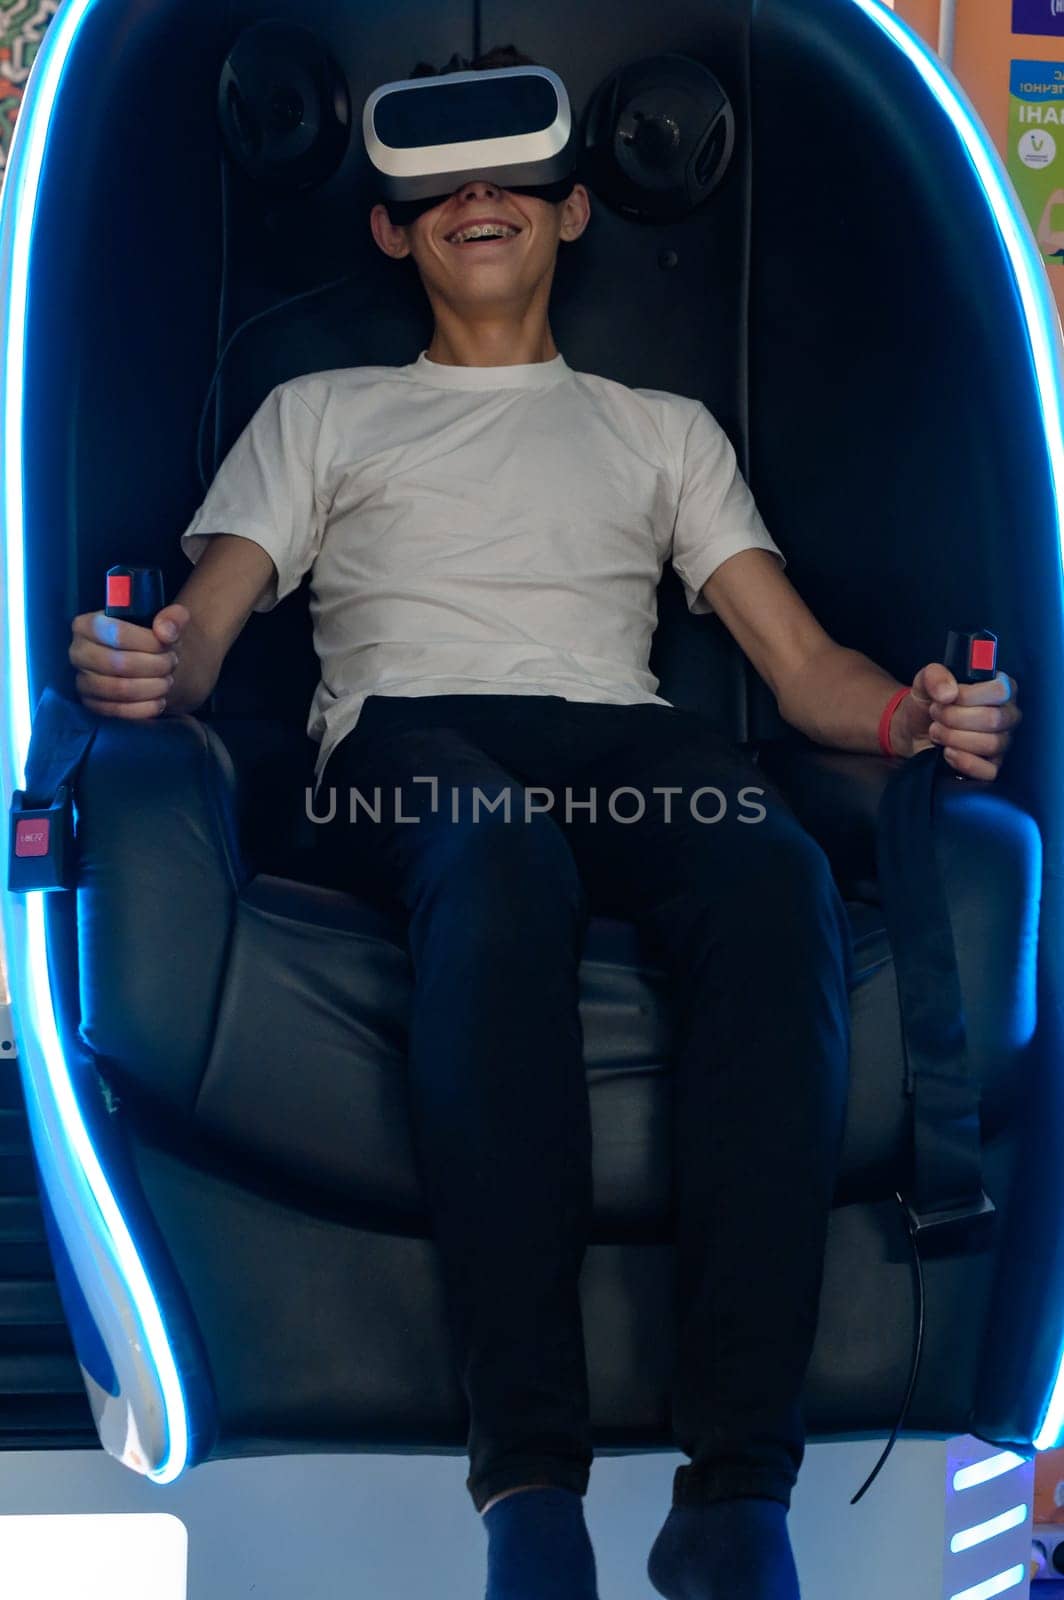 A guy is sitting on a ride with vr glasses, by Niko_Cingaryuk